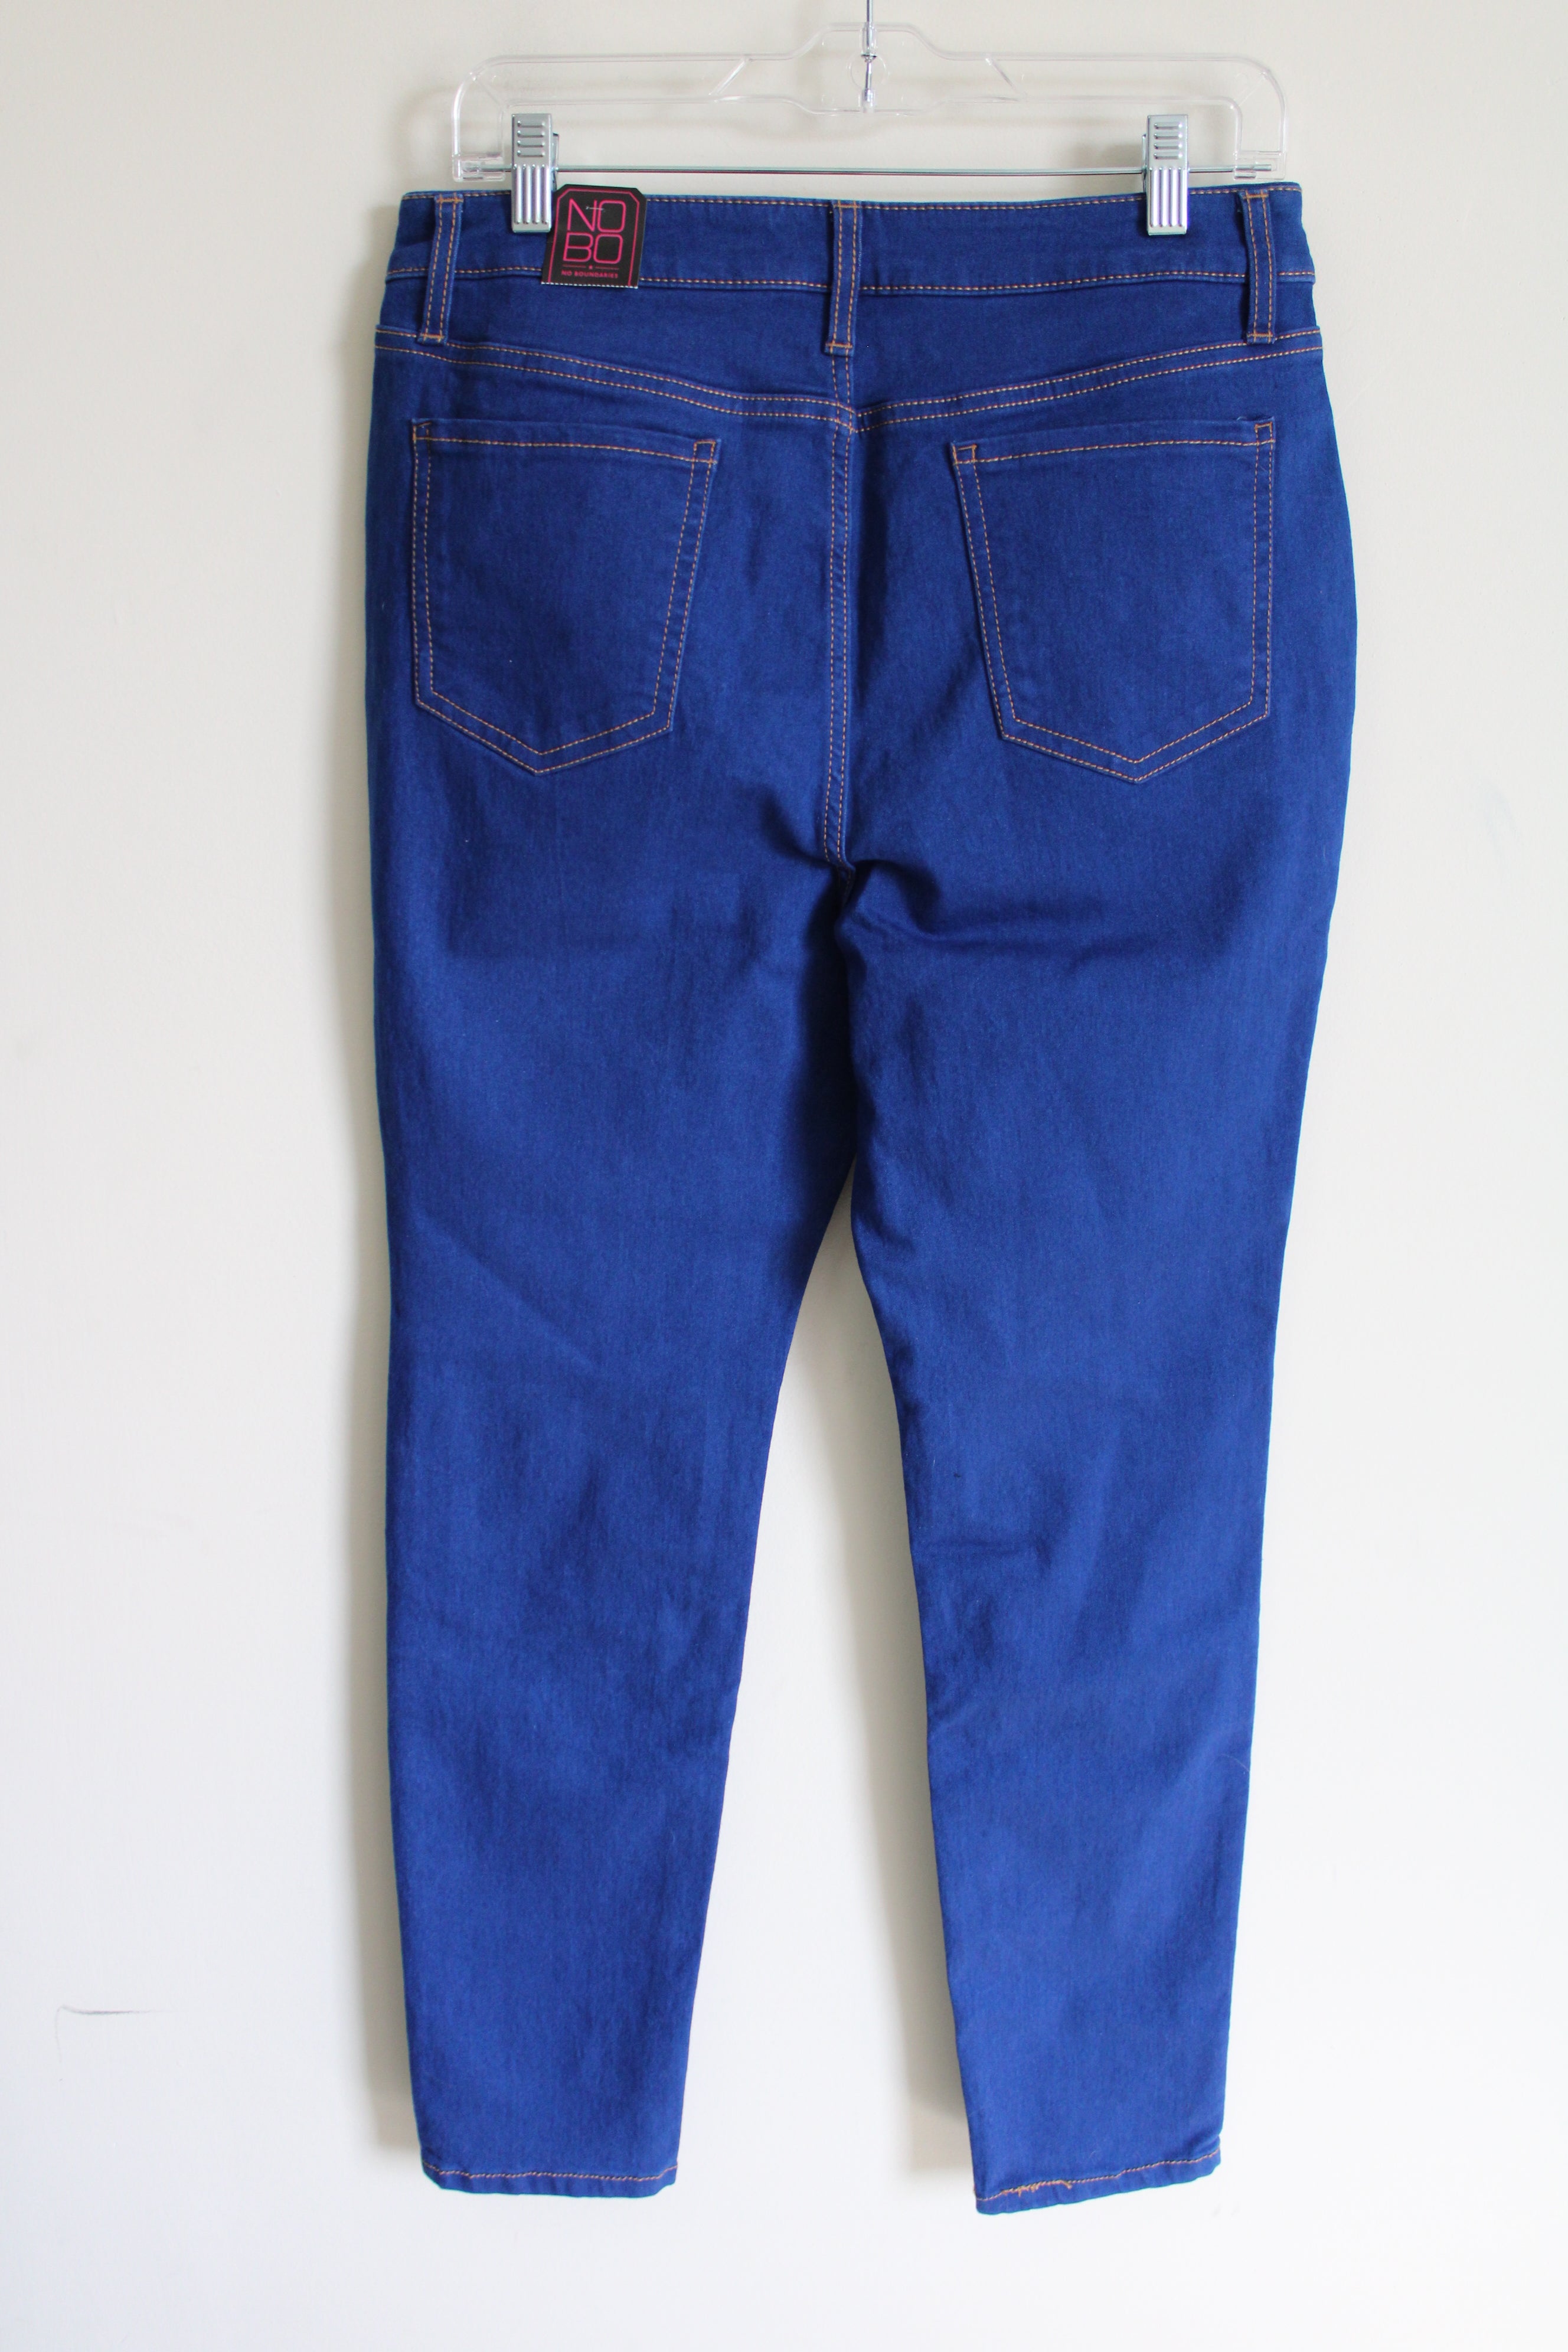 NEW No Boundaries High Rise Blue Jeans